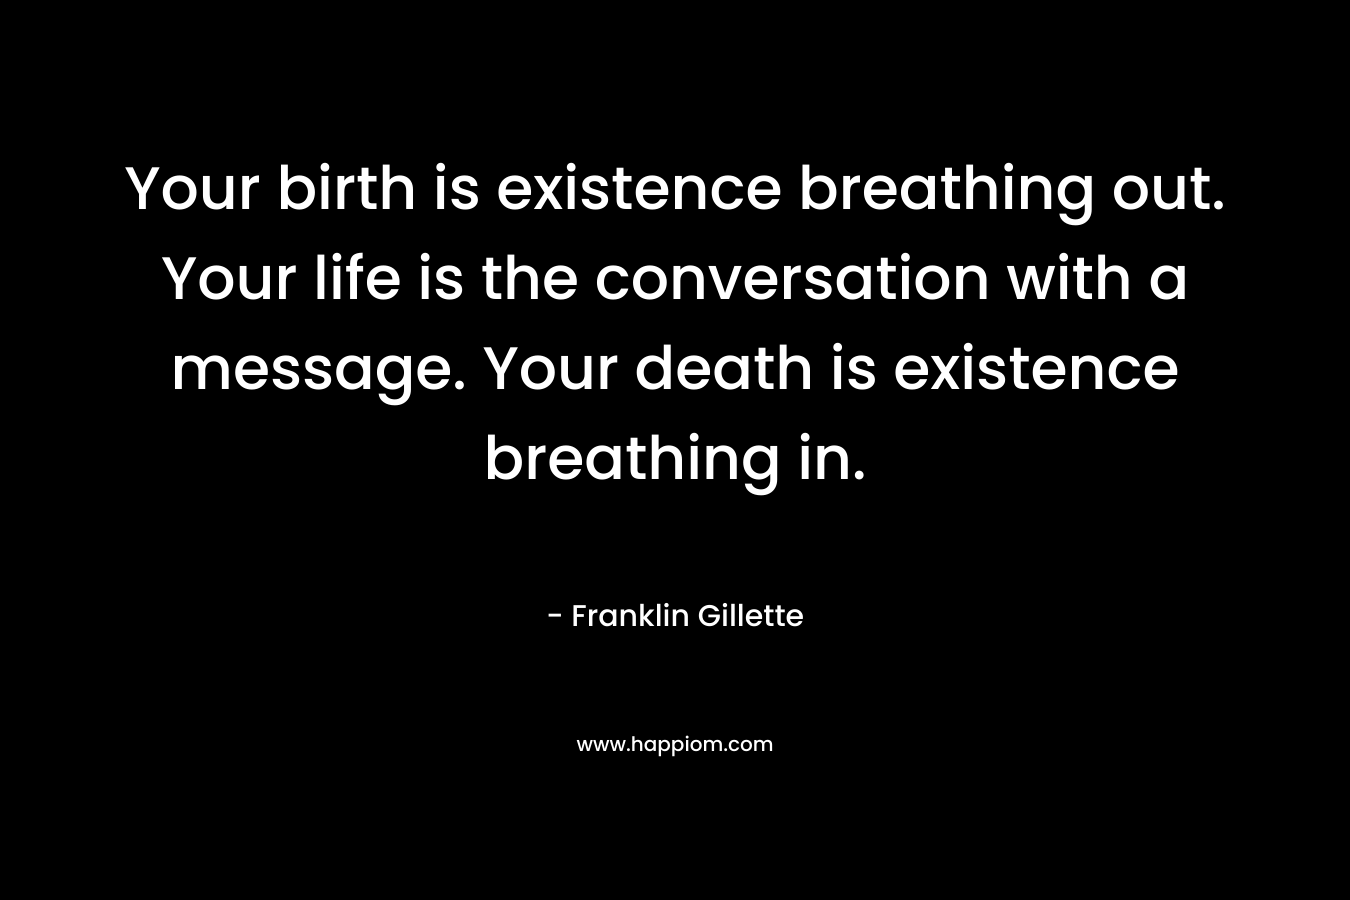 Your birth is existence breathing out. Your life is the conversation with a message. Your death is existence breathing in.